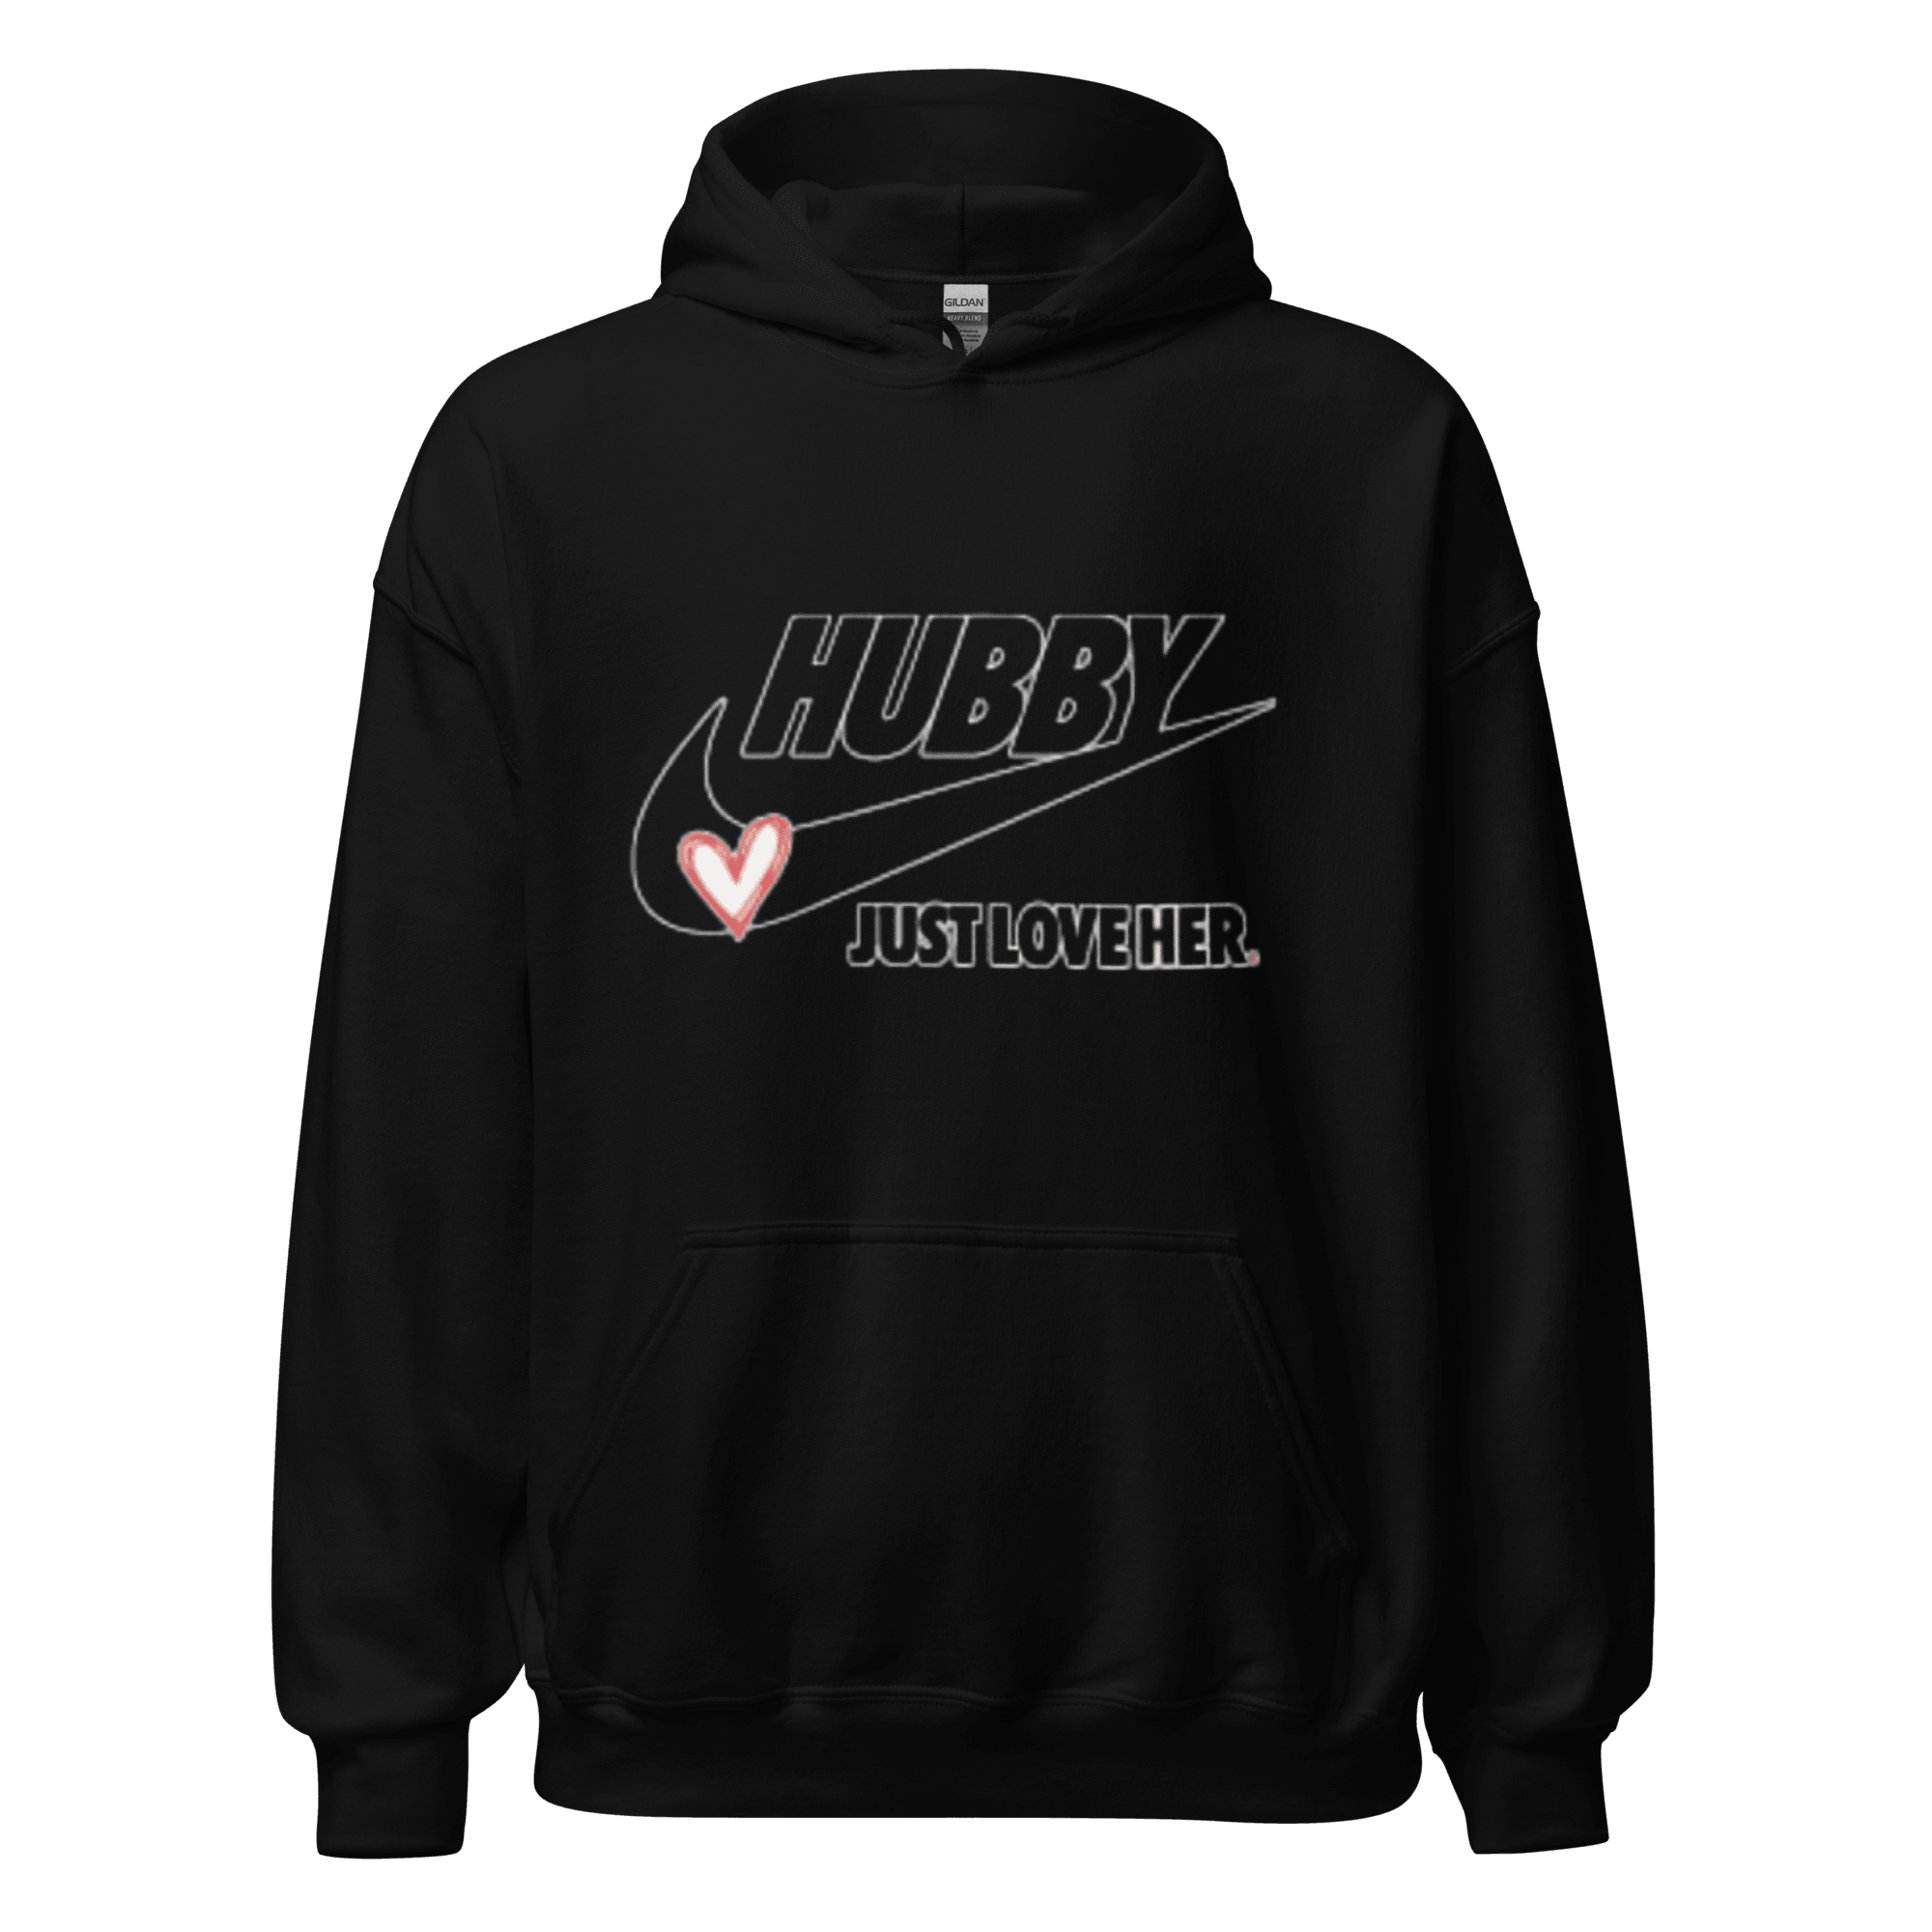 Husband and Wife Hoodie Set Hubby Just Love Her/Wifey Just Love Him Cotton Blend Ultra Soft Pullovers - TopKoalaTee